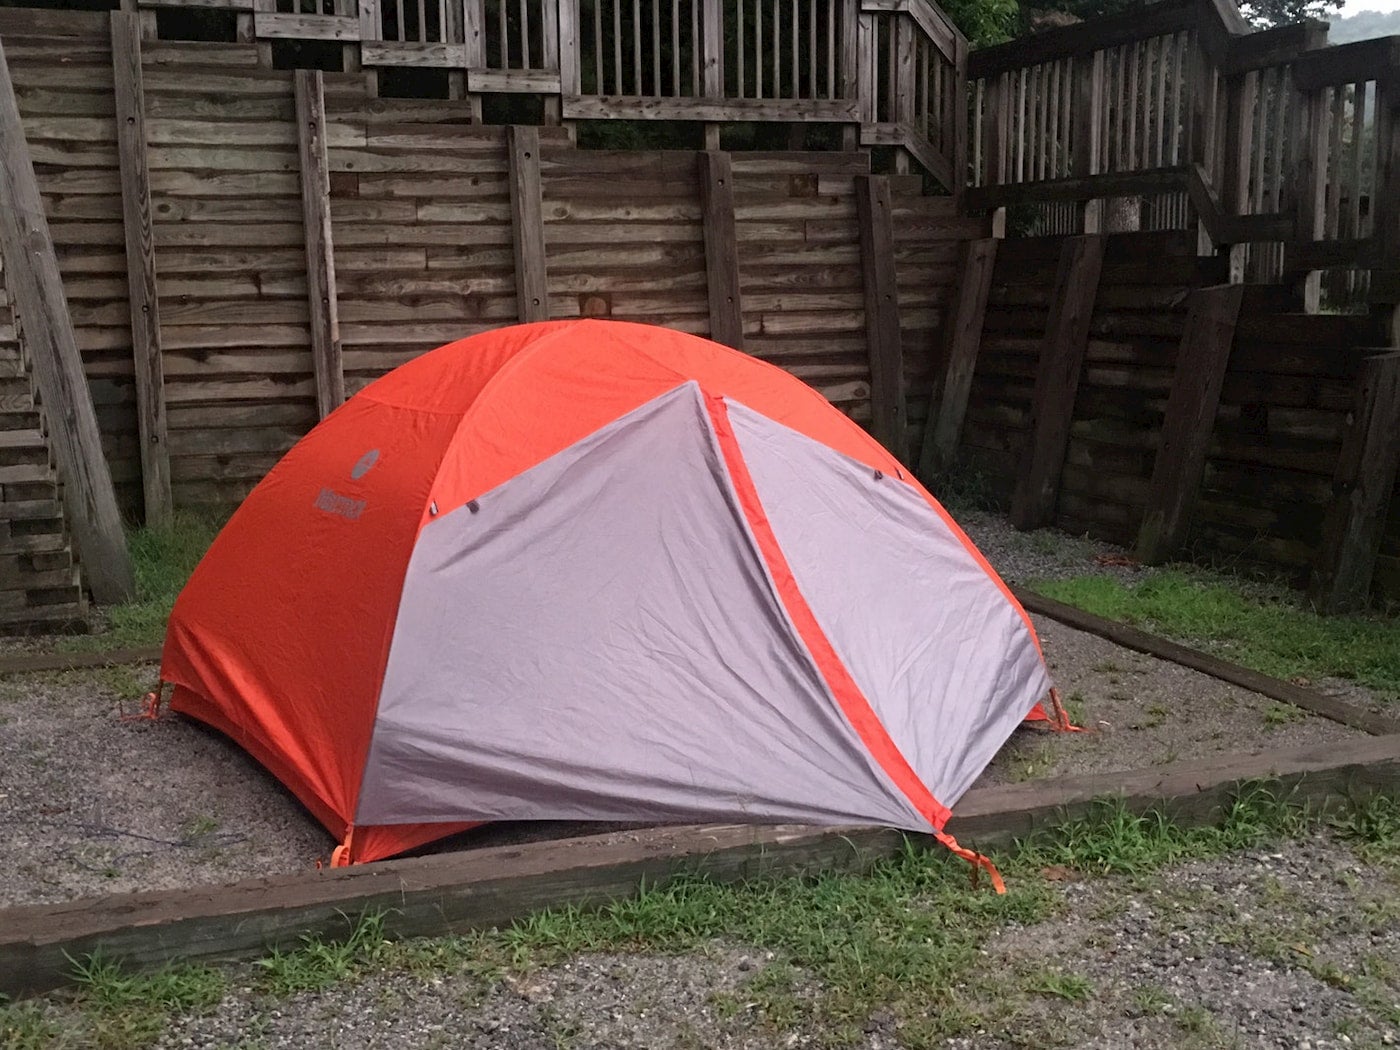 Orange tent setup in plot in front of wooden fence at Amicola Falls State Park.